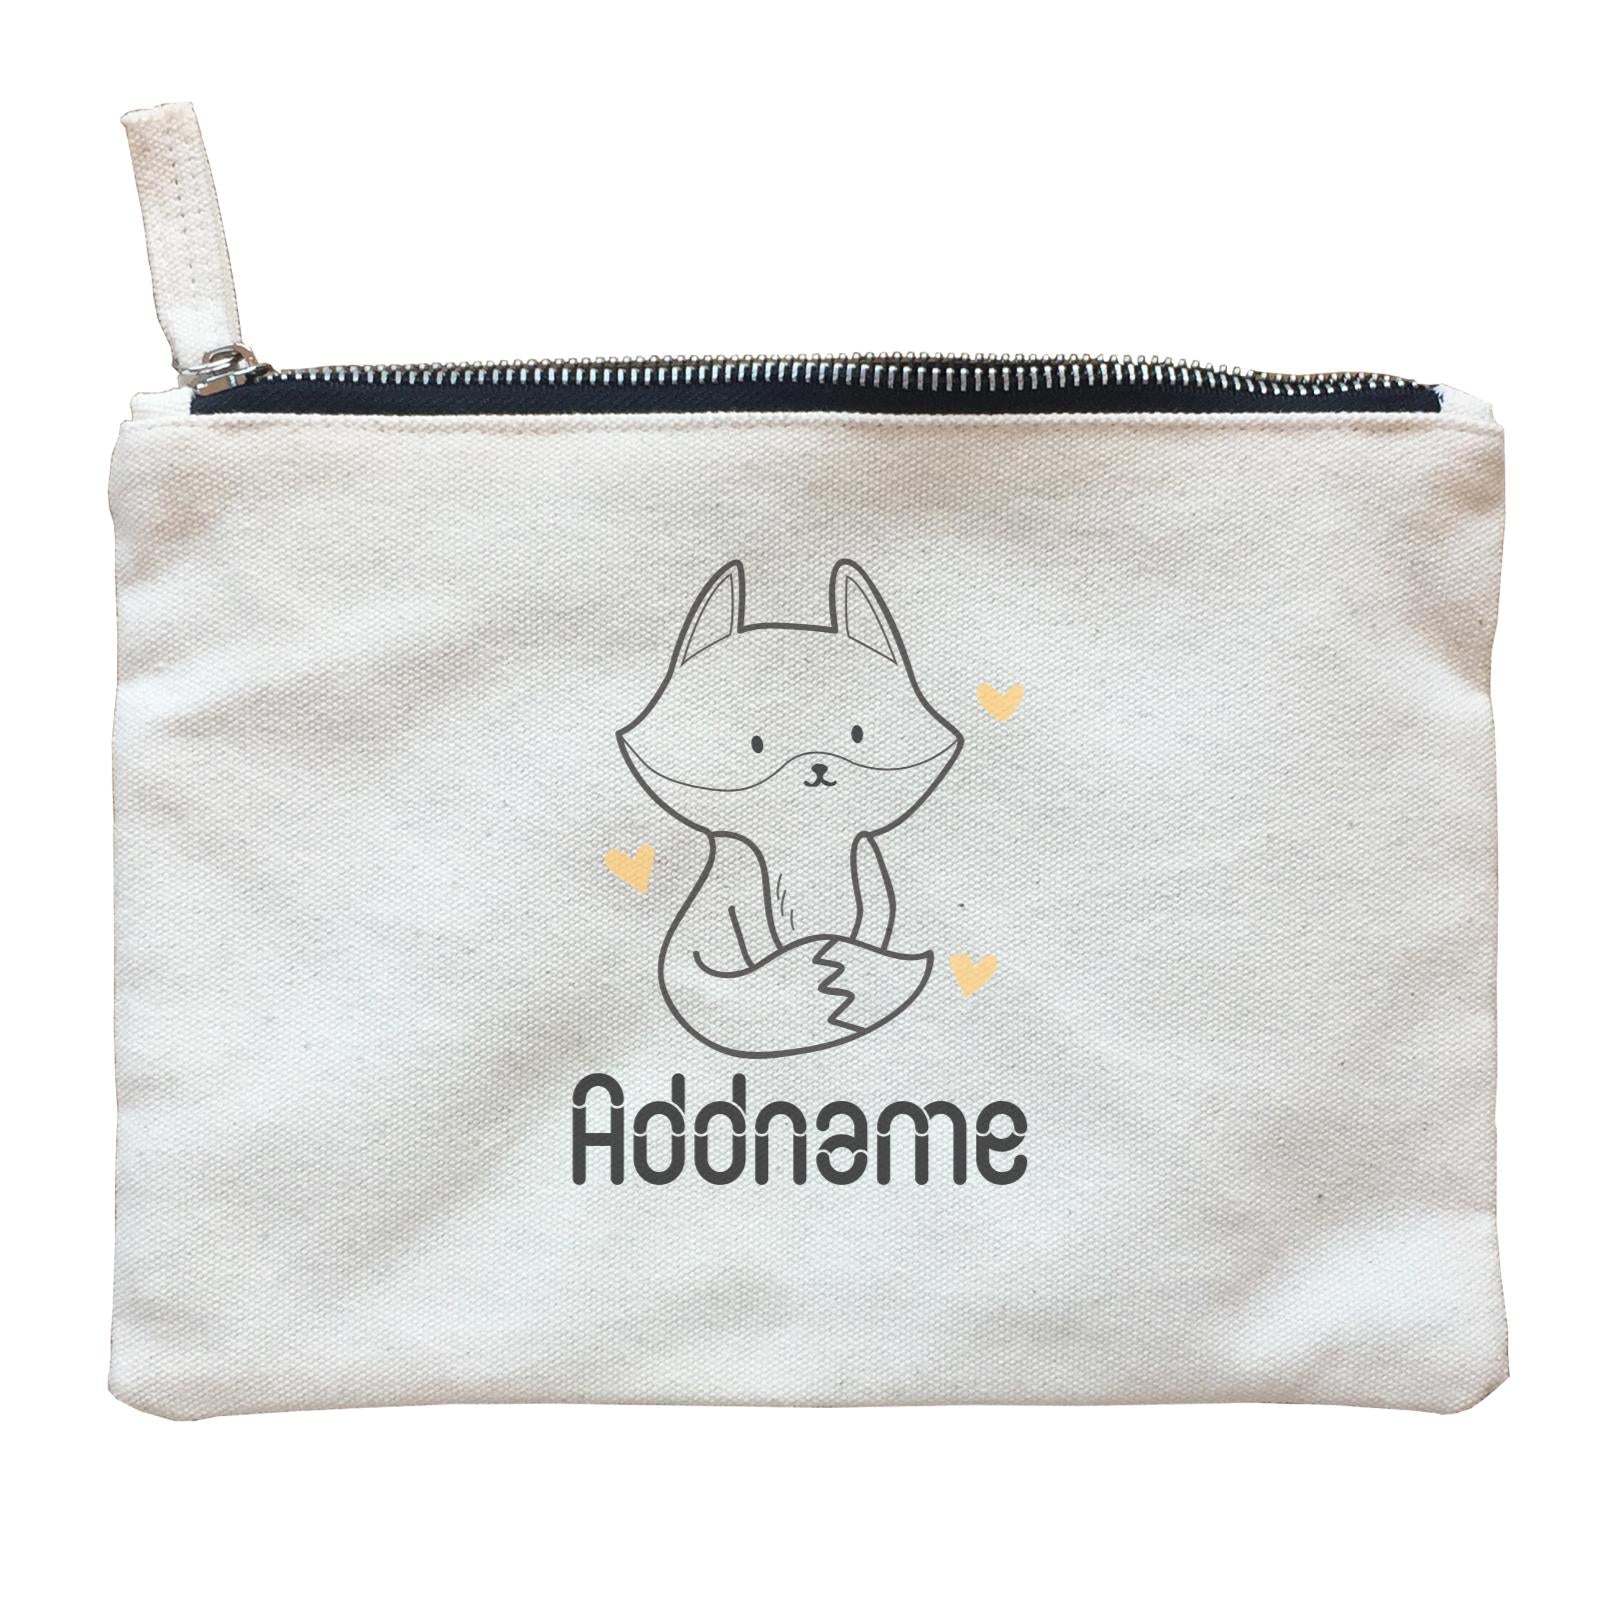 Coloring Outline Cute Hand Drawn Animals Fox Fox Addname Zipper Pouch